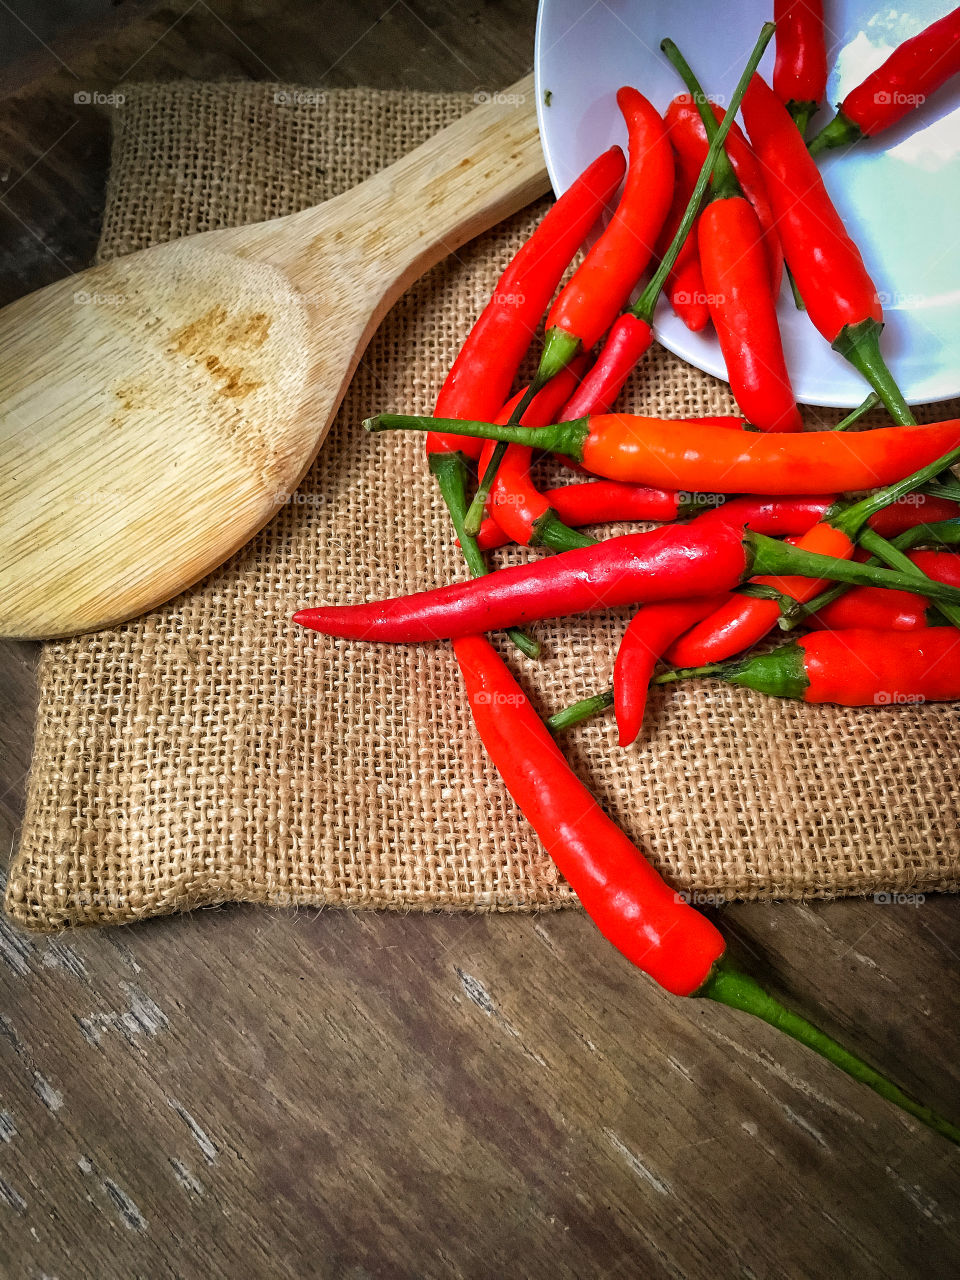 Red chili pepper on the wooden table.